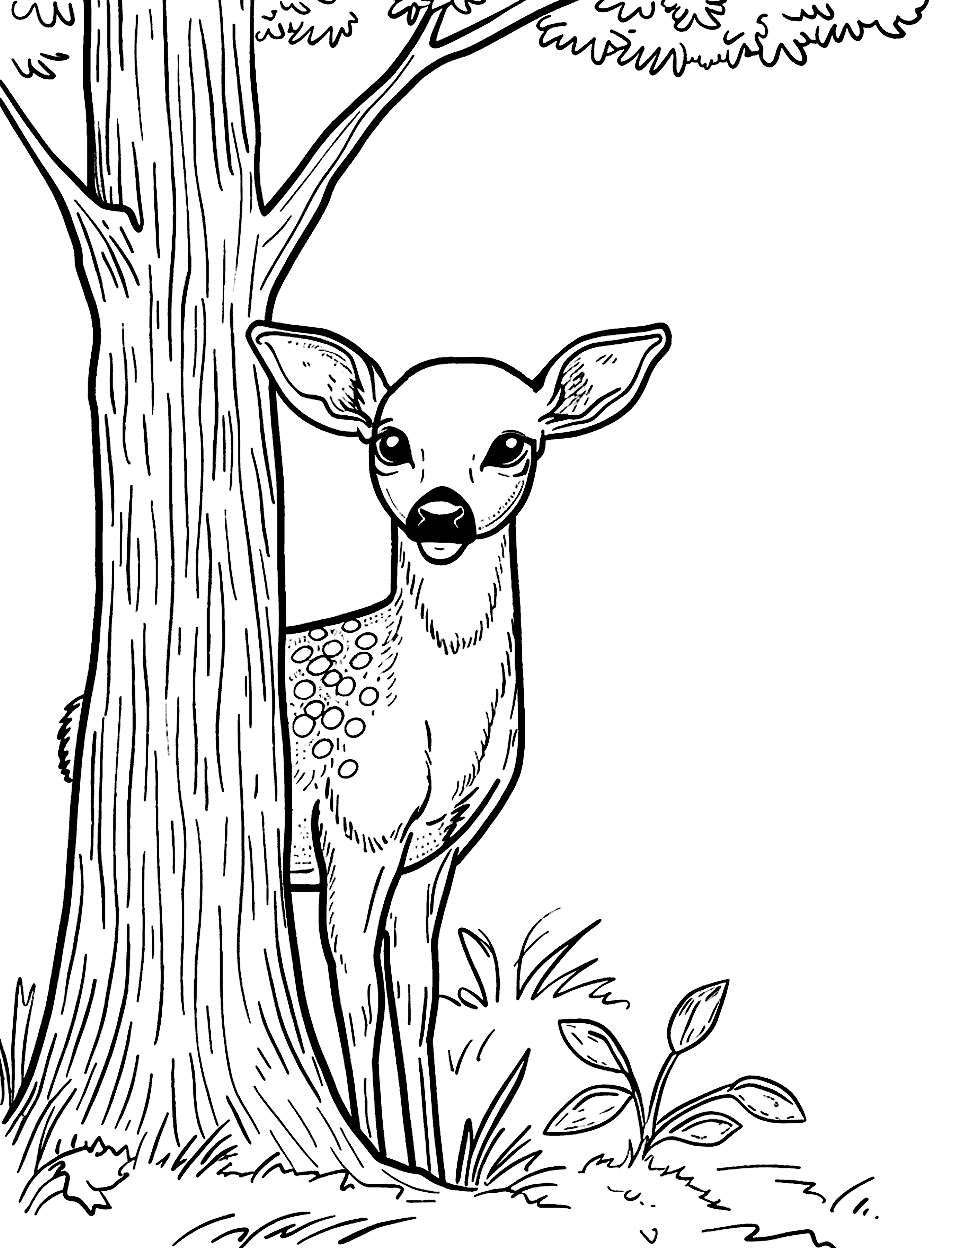 Fawn Hiding Behind a Tree Coloring Page - A shy fawn peeking out from behind a tree trunk.